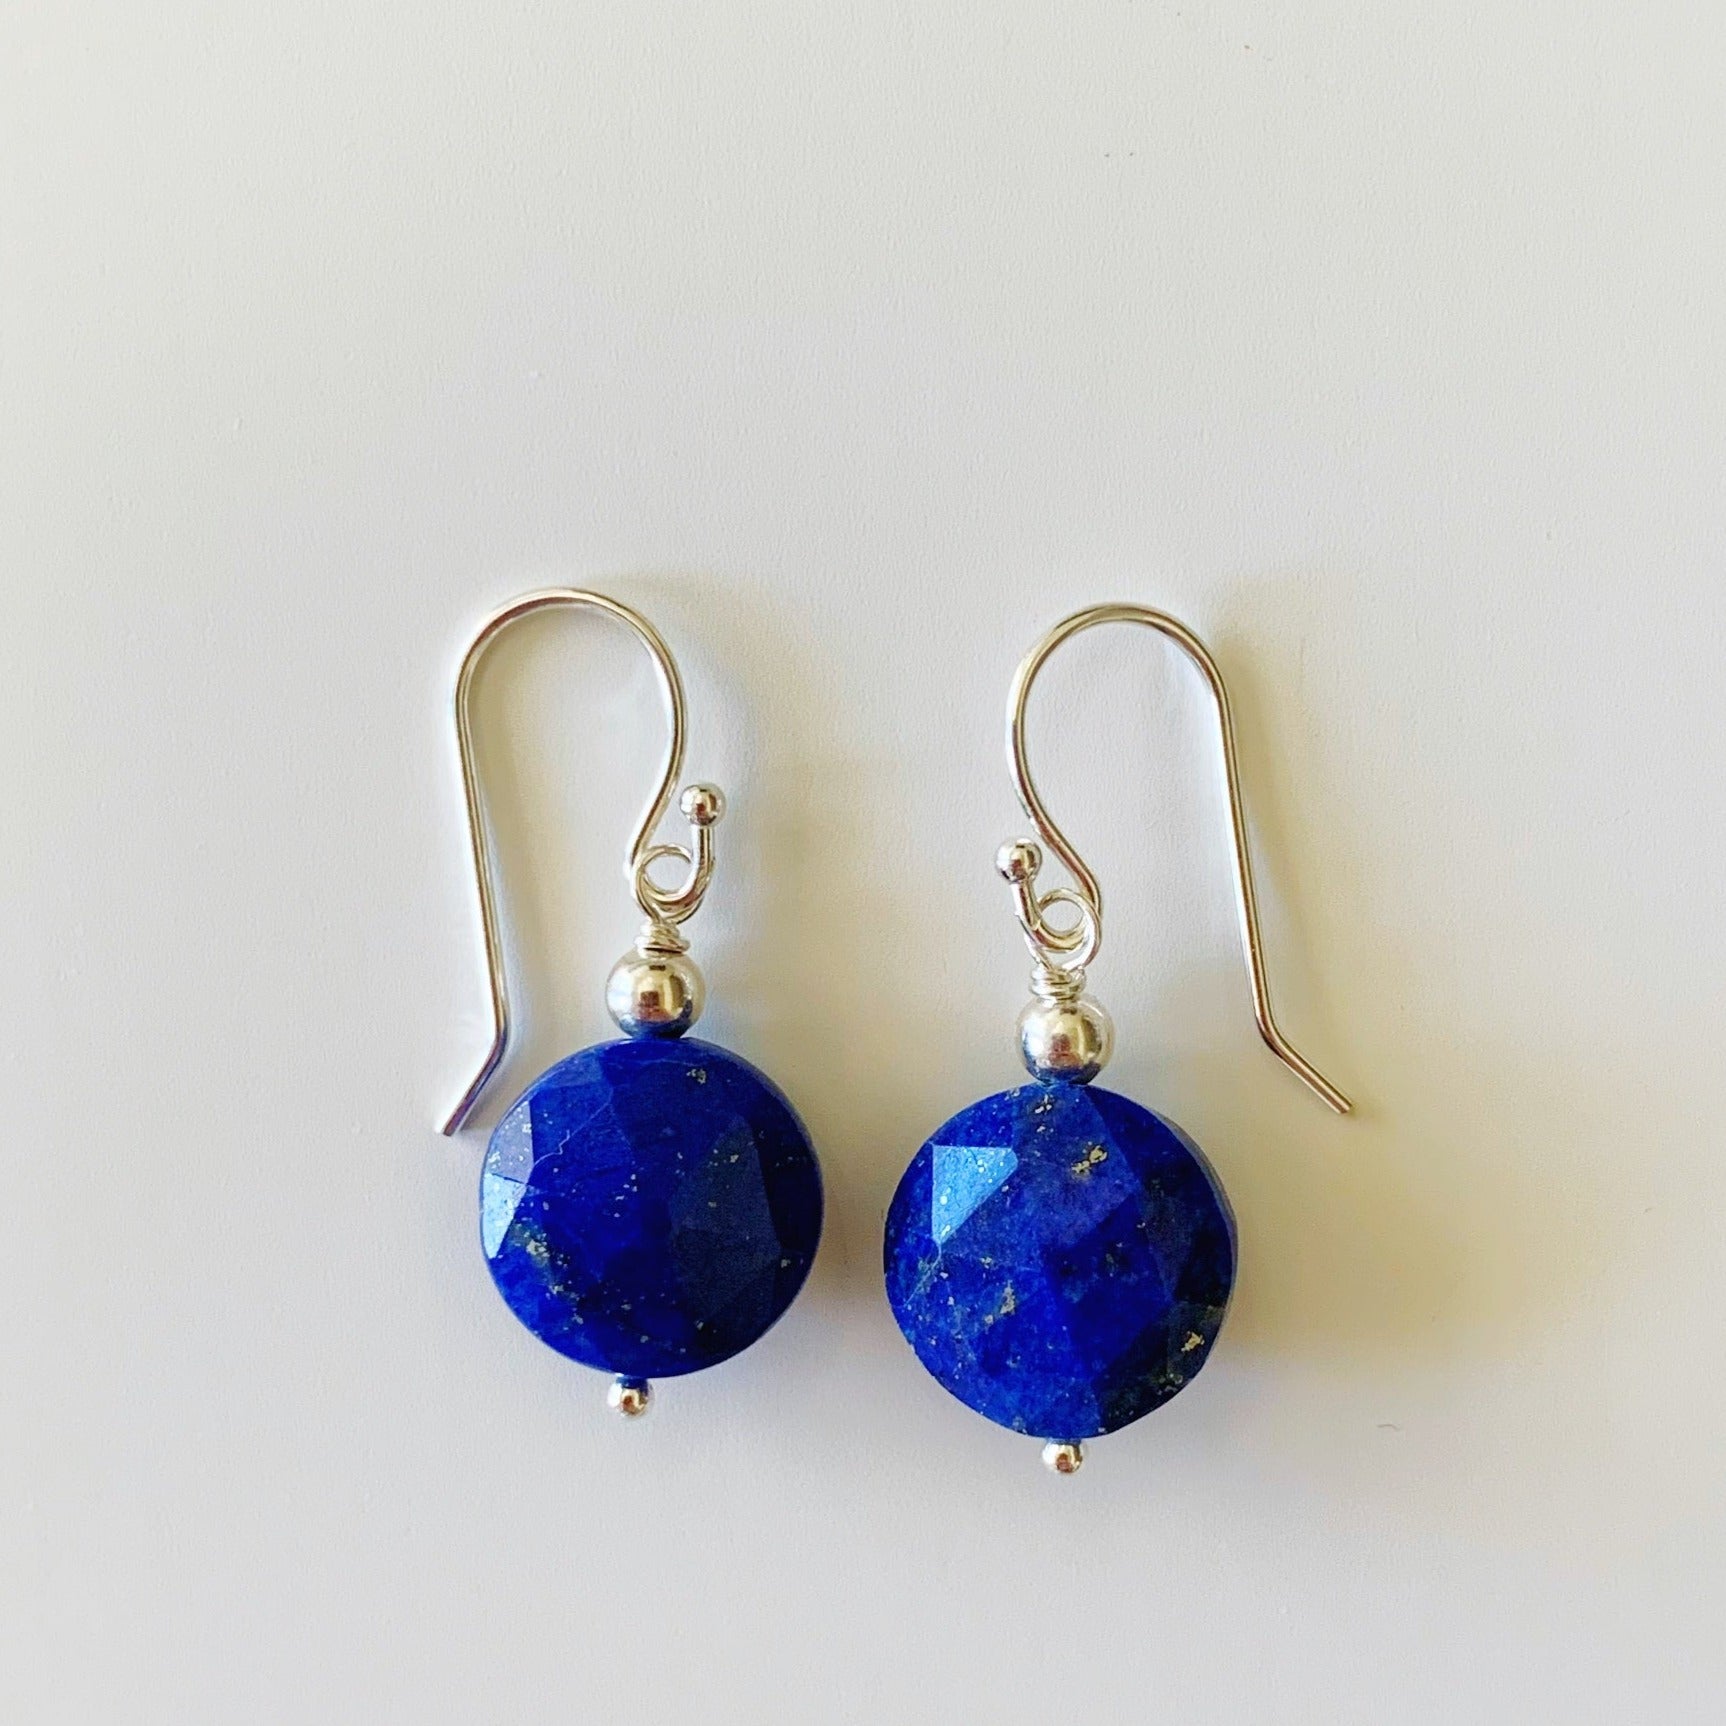 the cobalt sky earrings by mermaids and madeleines are designed with lapis faceted coin beads. Its a traditional small drop earring style with sterling silver bead and findings. this pair is photographed flat on a white surface